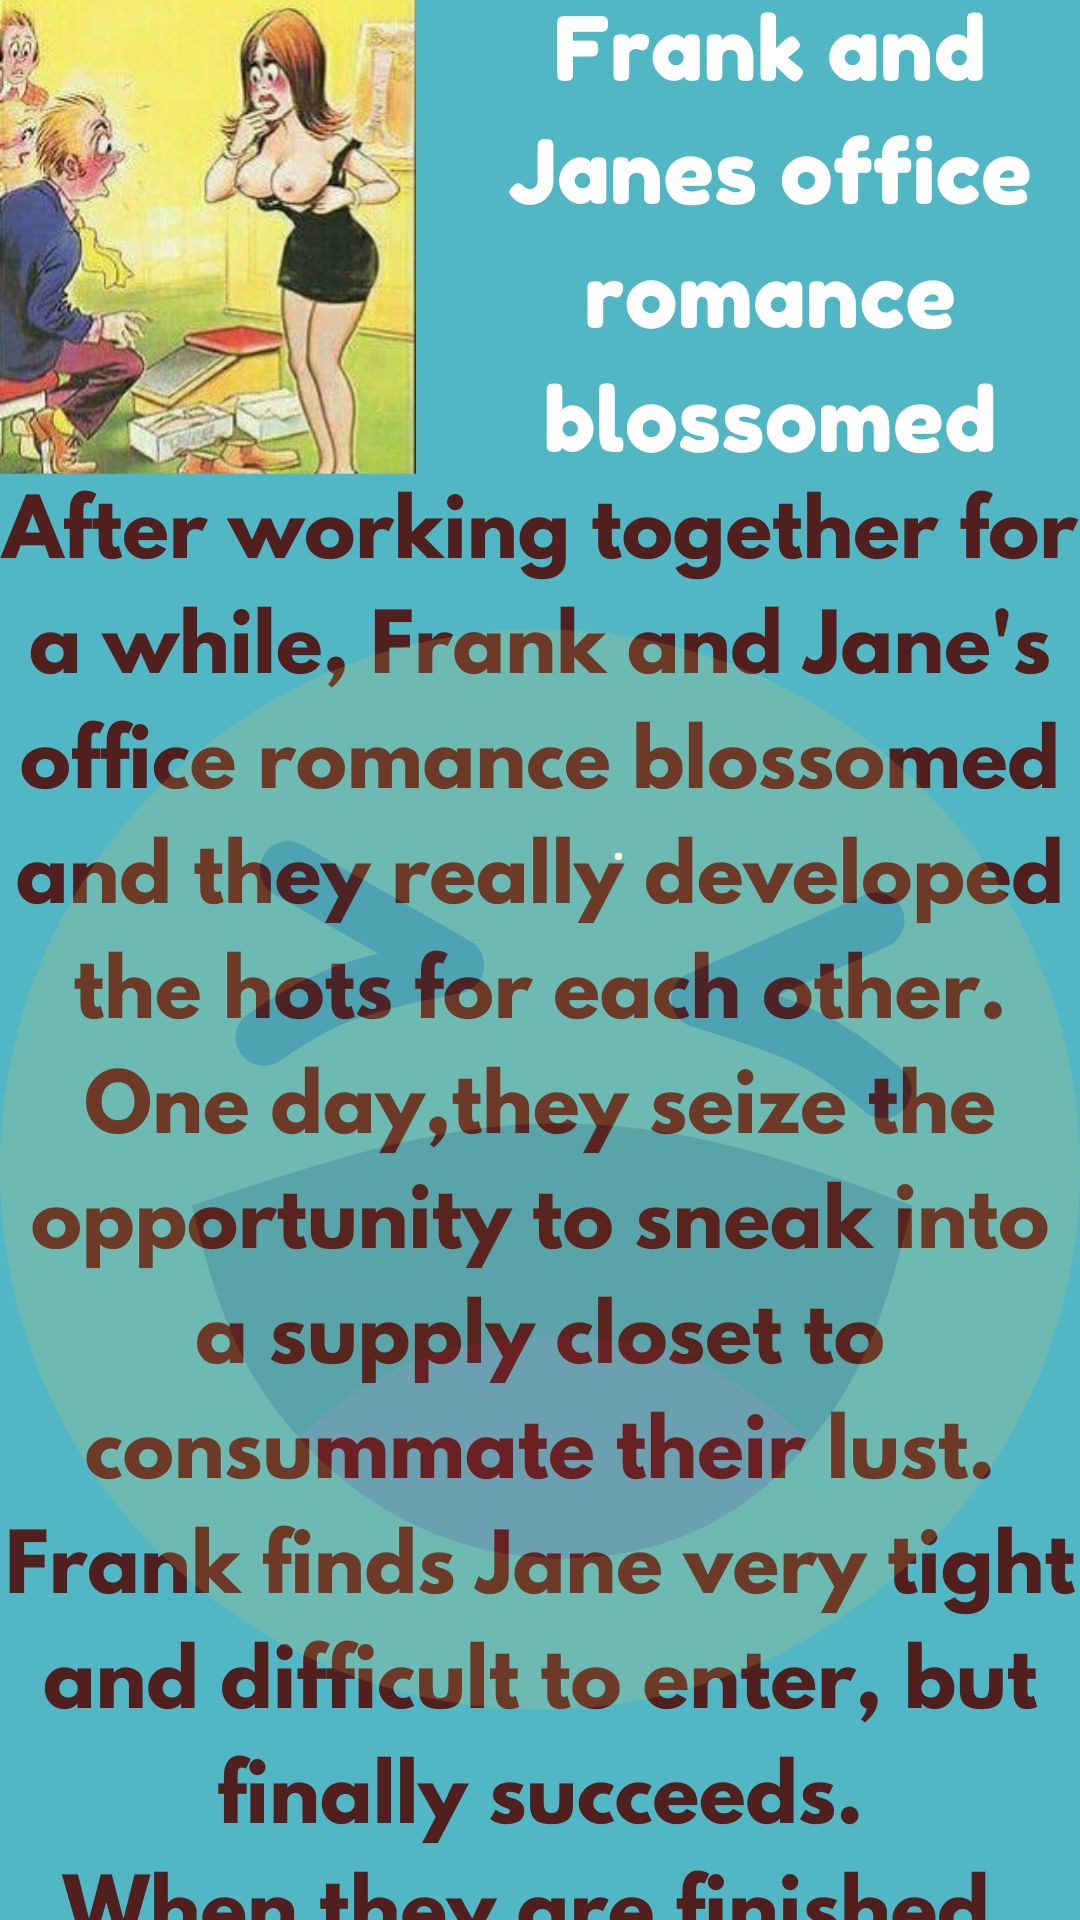 Frank and Janes office romance blossomed